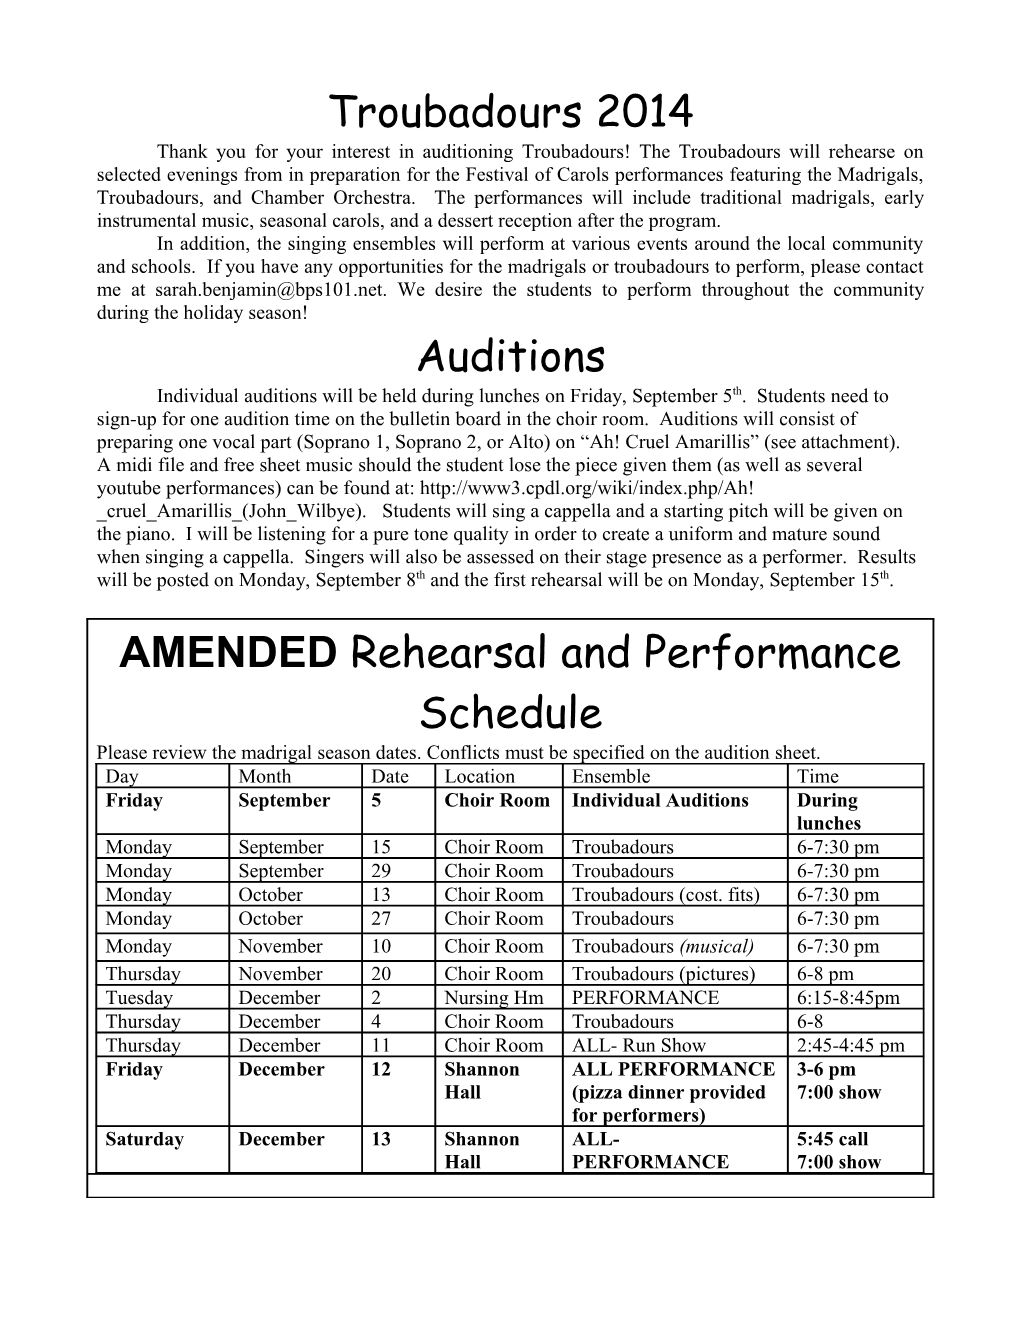 Thank You for Your Interest in Auditioning Troubadours! the Troubadours Will Rehearse On